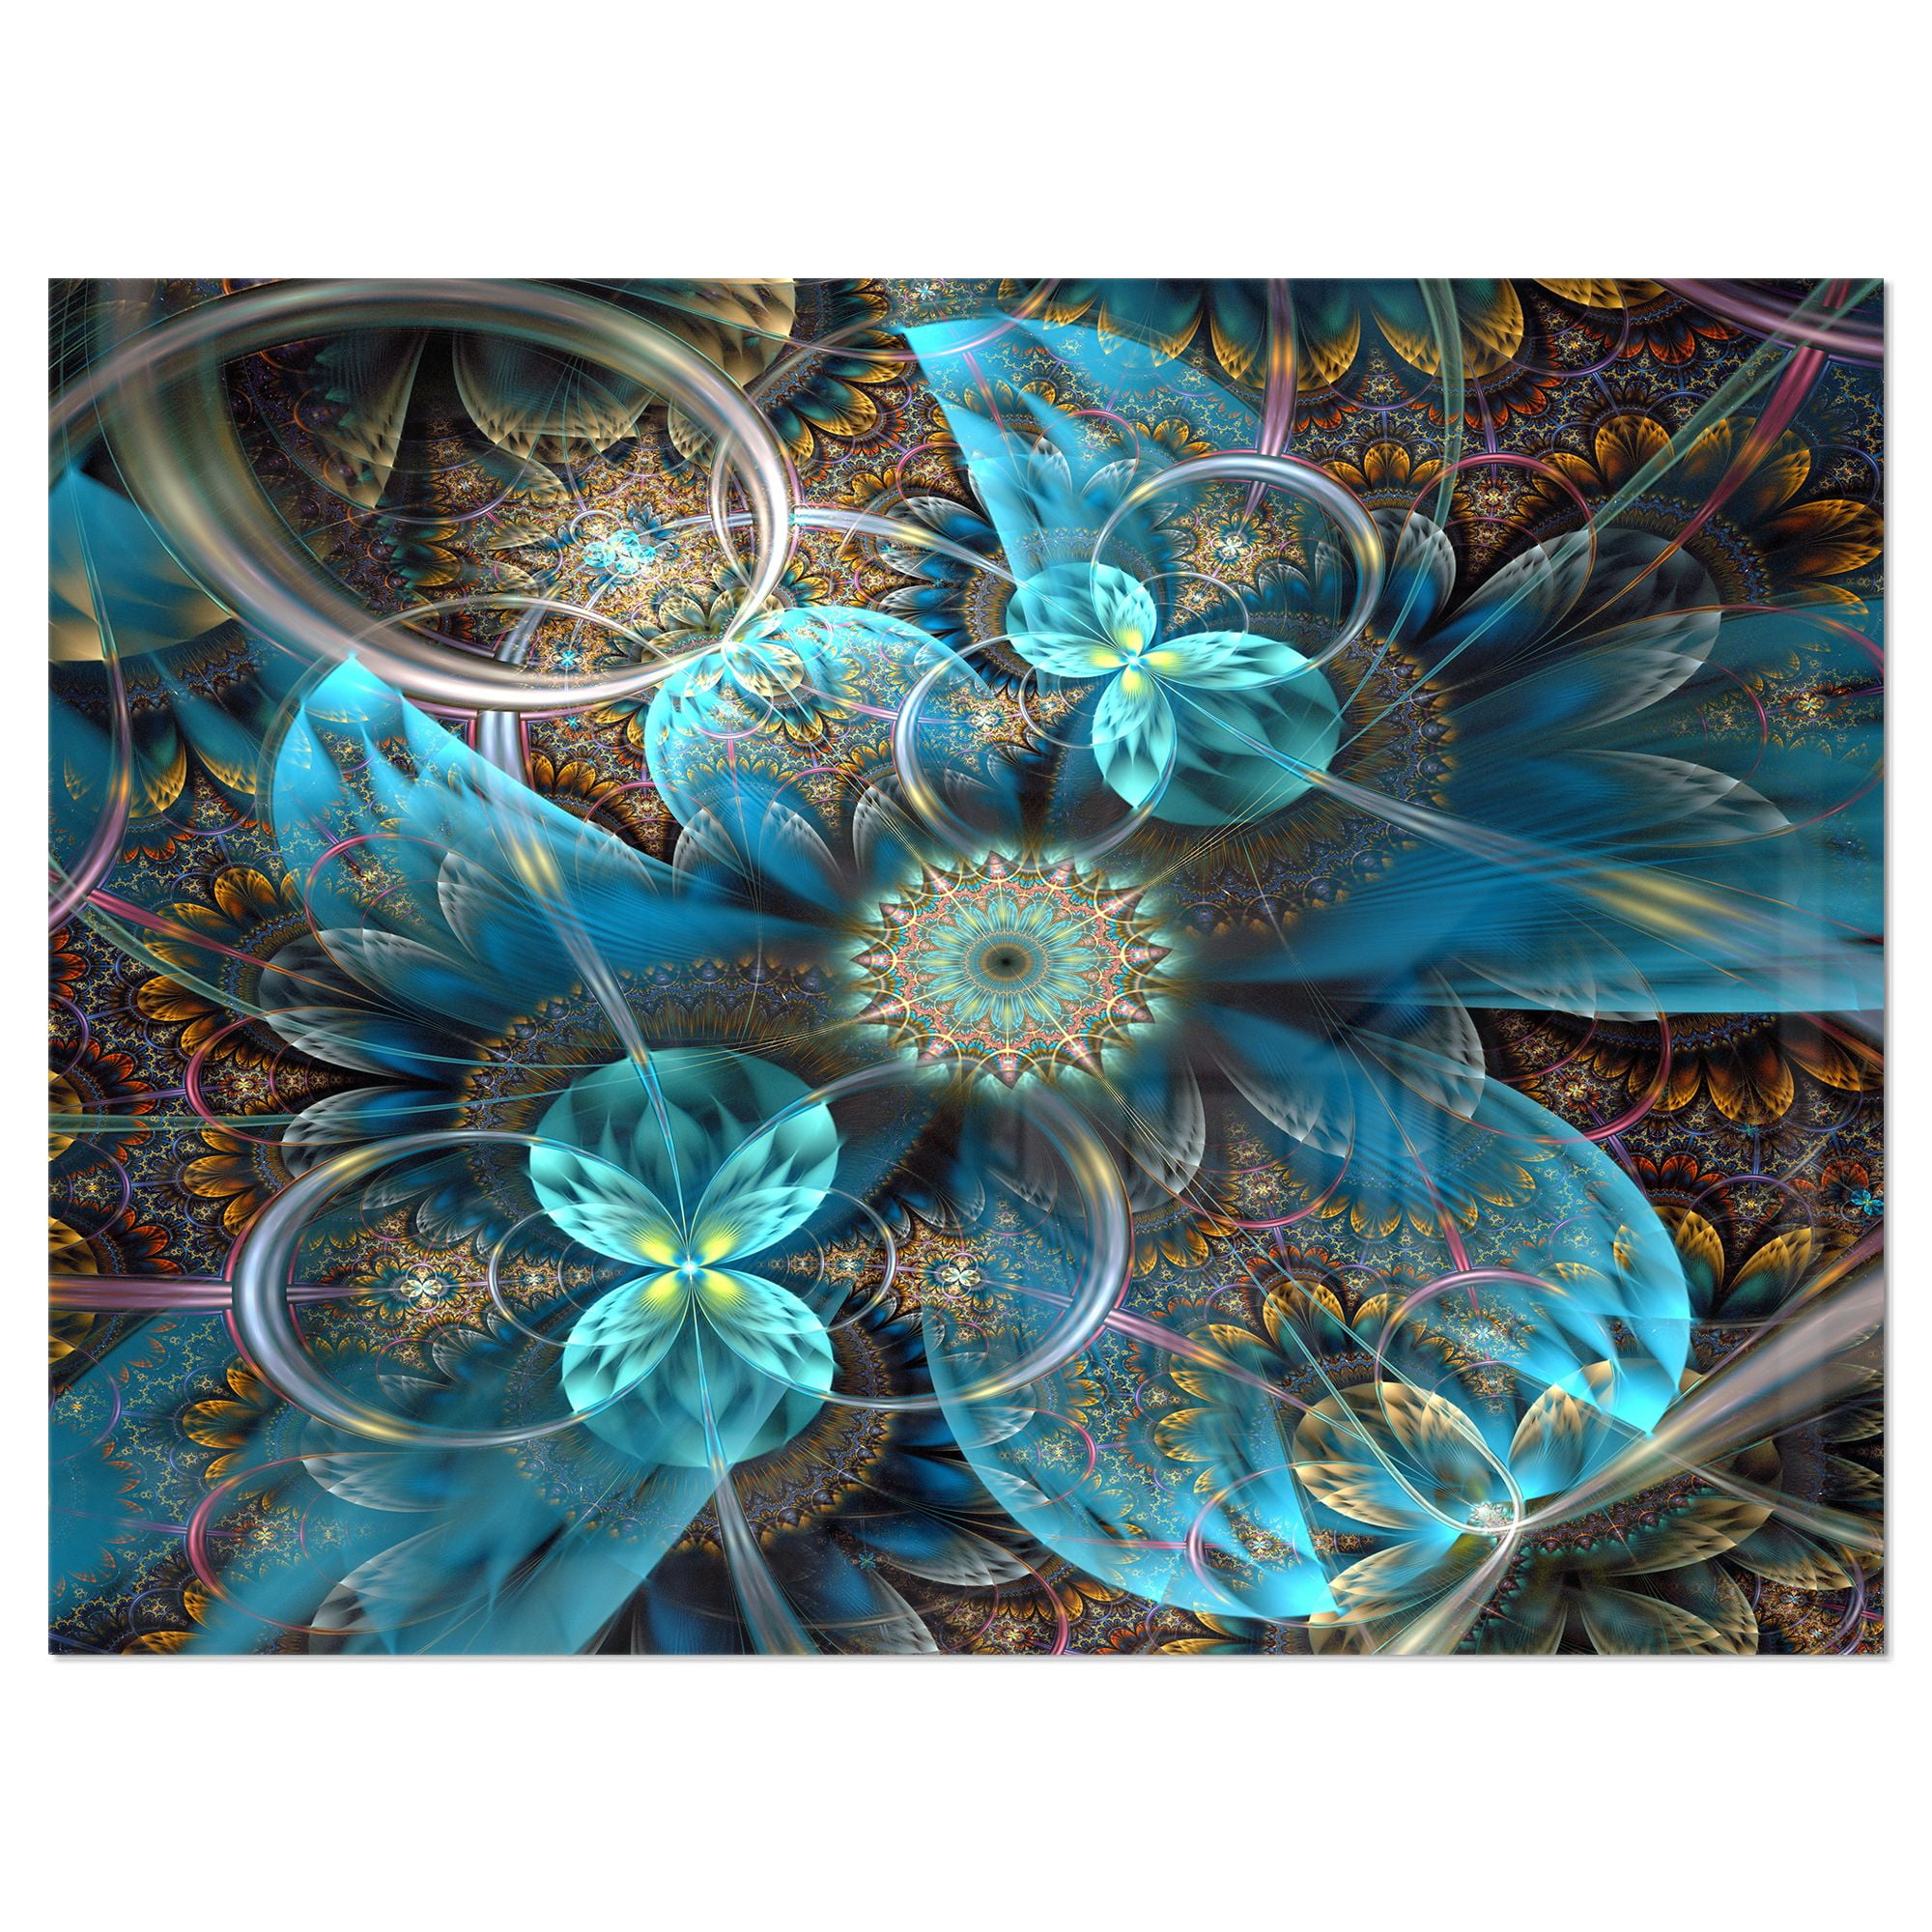 Fractal Art Abstract Home Decor Teal Turquoise Metal Light Switch Plate Cover 